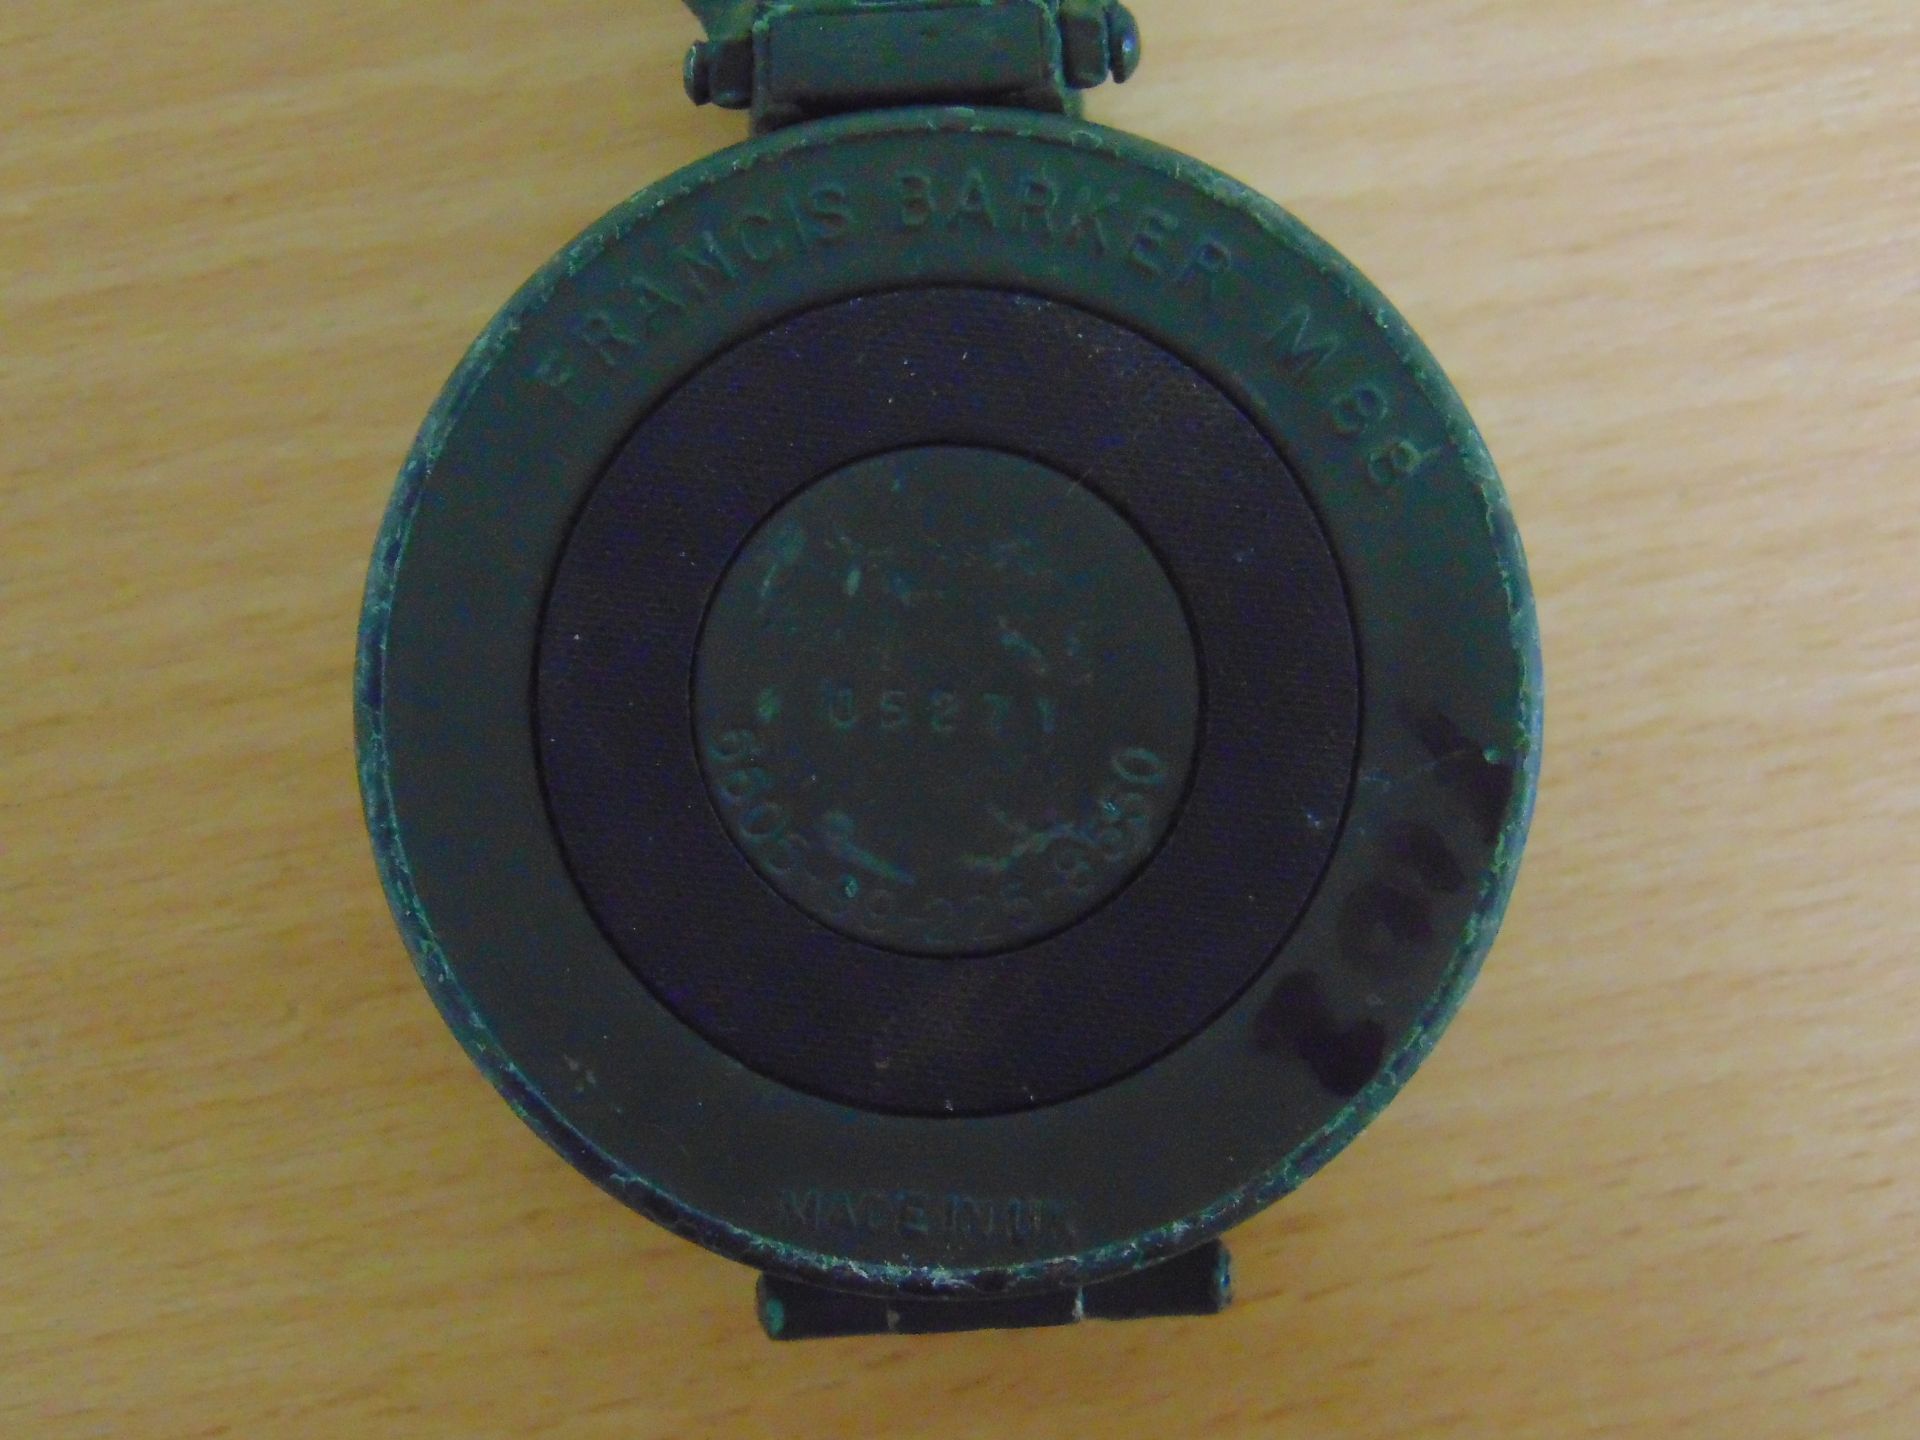 NICE FRANCIS BAKER M88 BRITISH ARMY PRISMATIC COMPASS NATO MARKS - Image 5 of 6